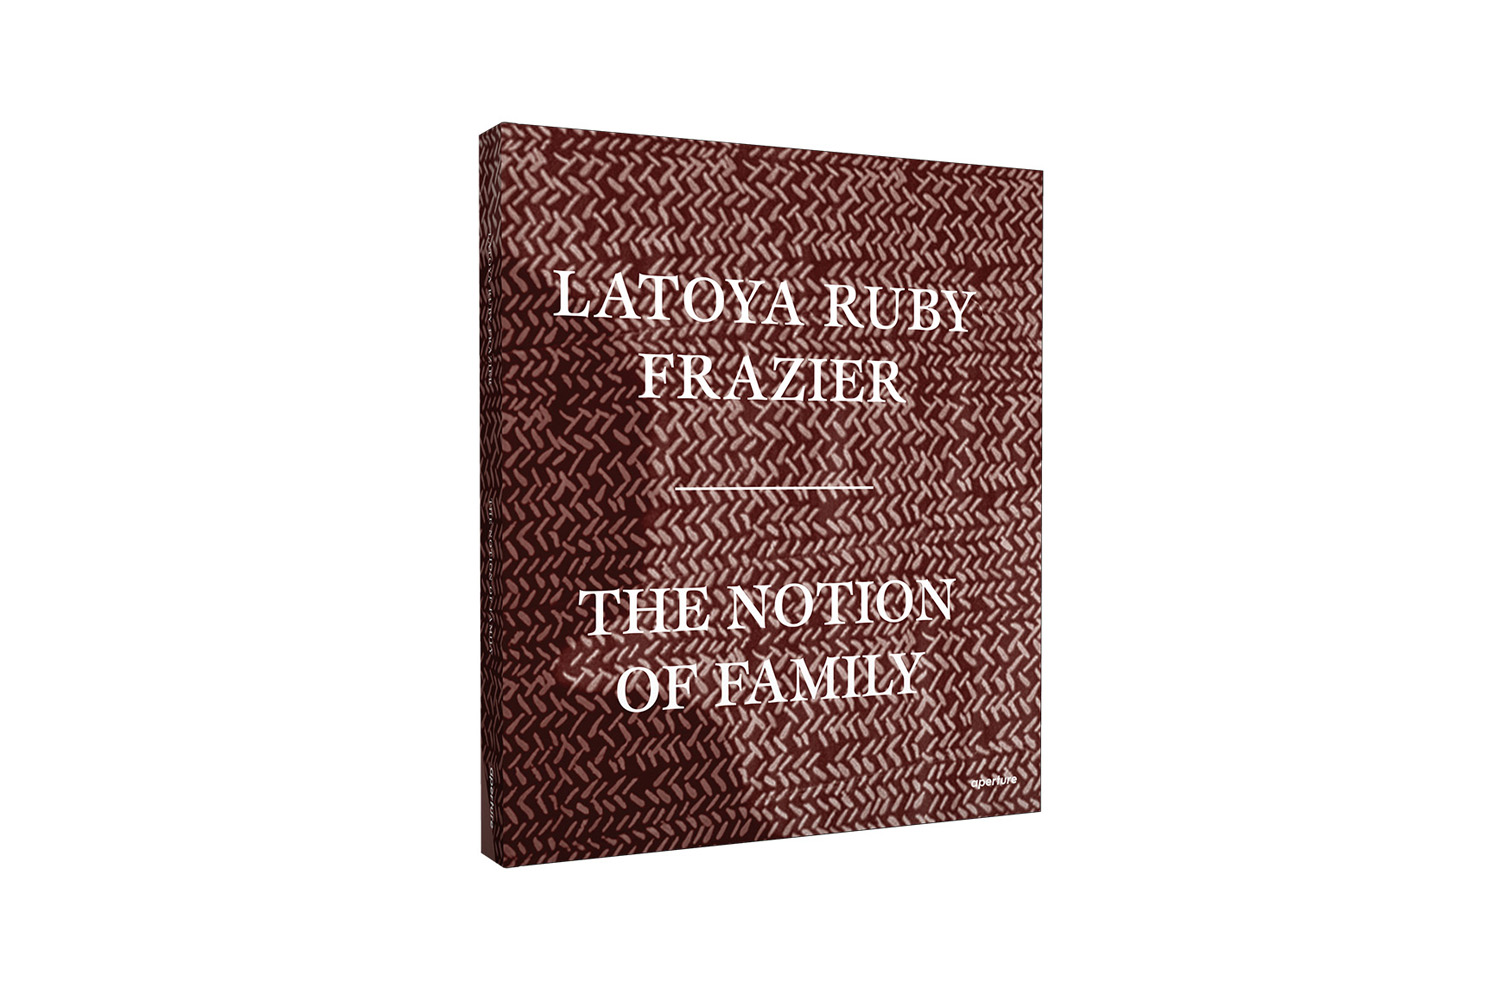 LaToya Ruby Frazier's The Notion of a Family, published by Aperture
                              In her first book, Frazier explores themes of economic inequity, racism and personal politics through three generations of her own family, and documents the tolls that big injustices can have on small families and communities alike.